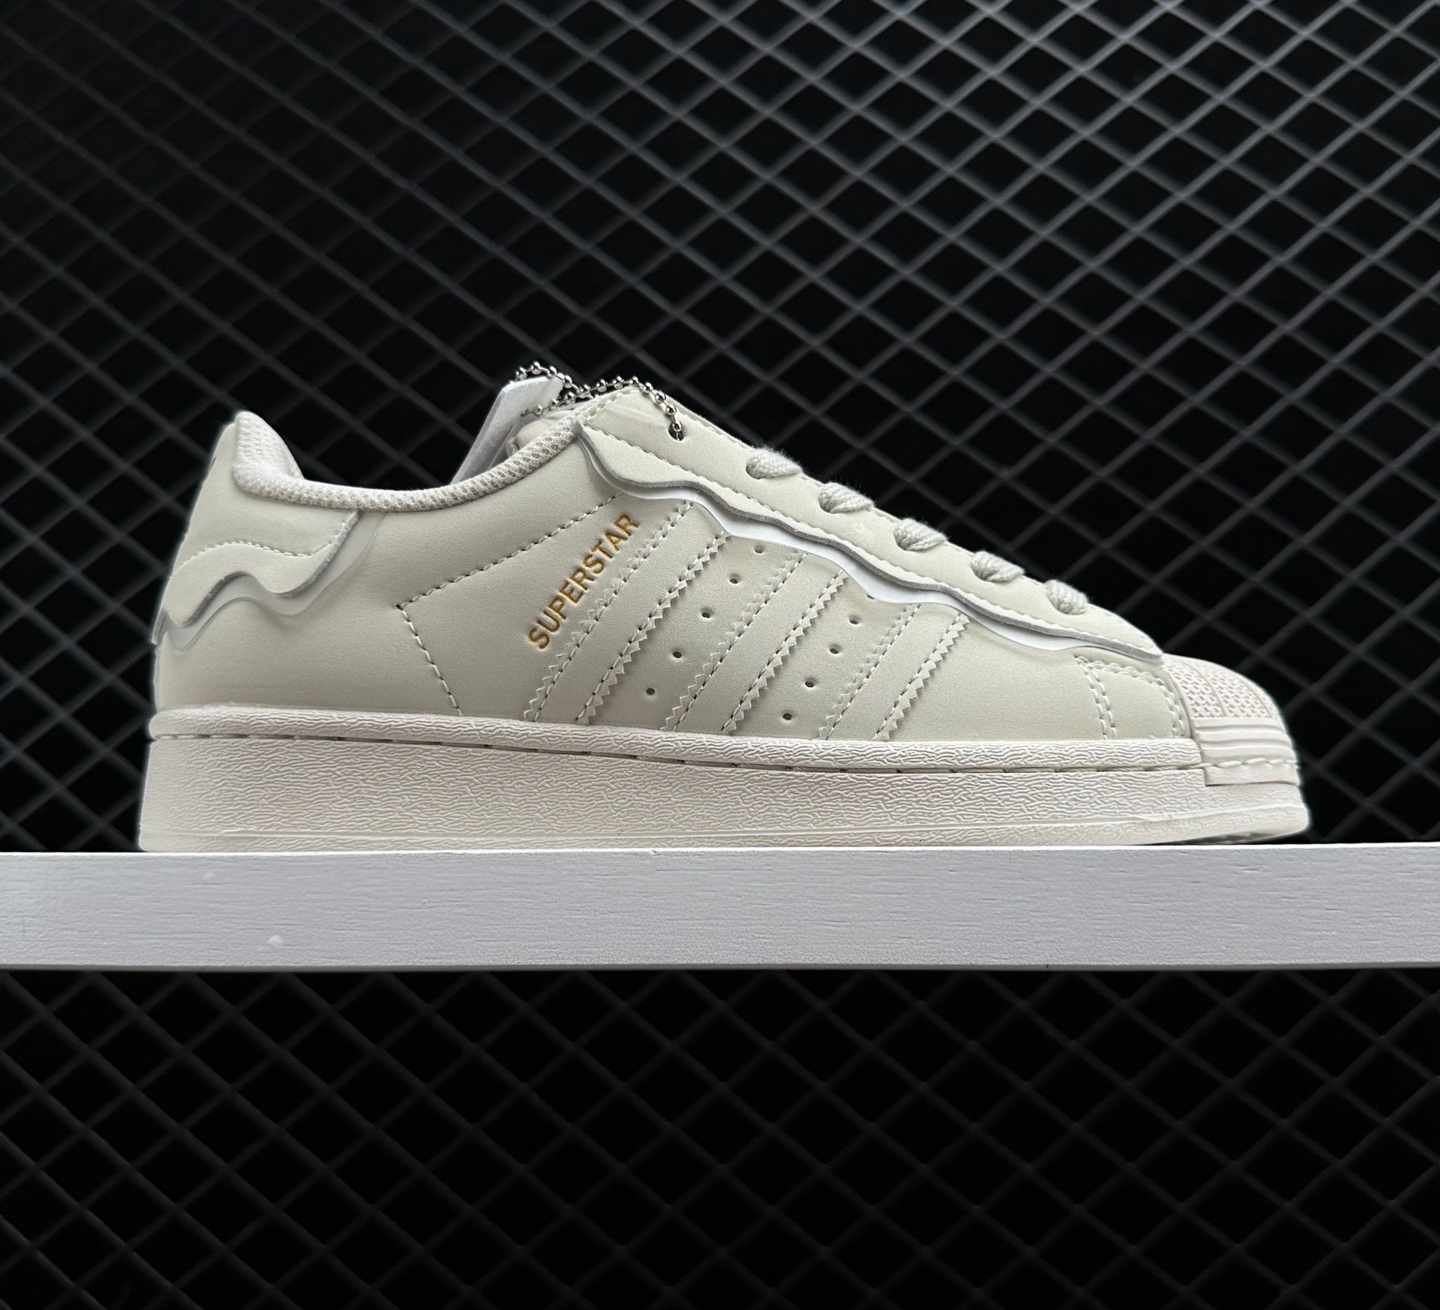 Adidas Originals Superstar Sneakers Creamy White GW4441 - Stylish and Comfortable Footwear